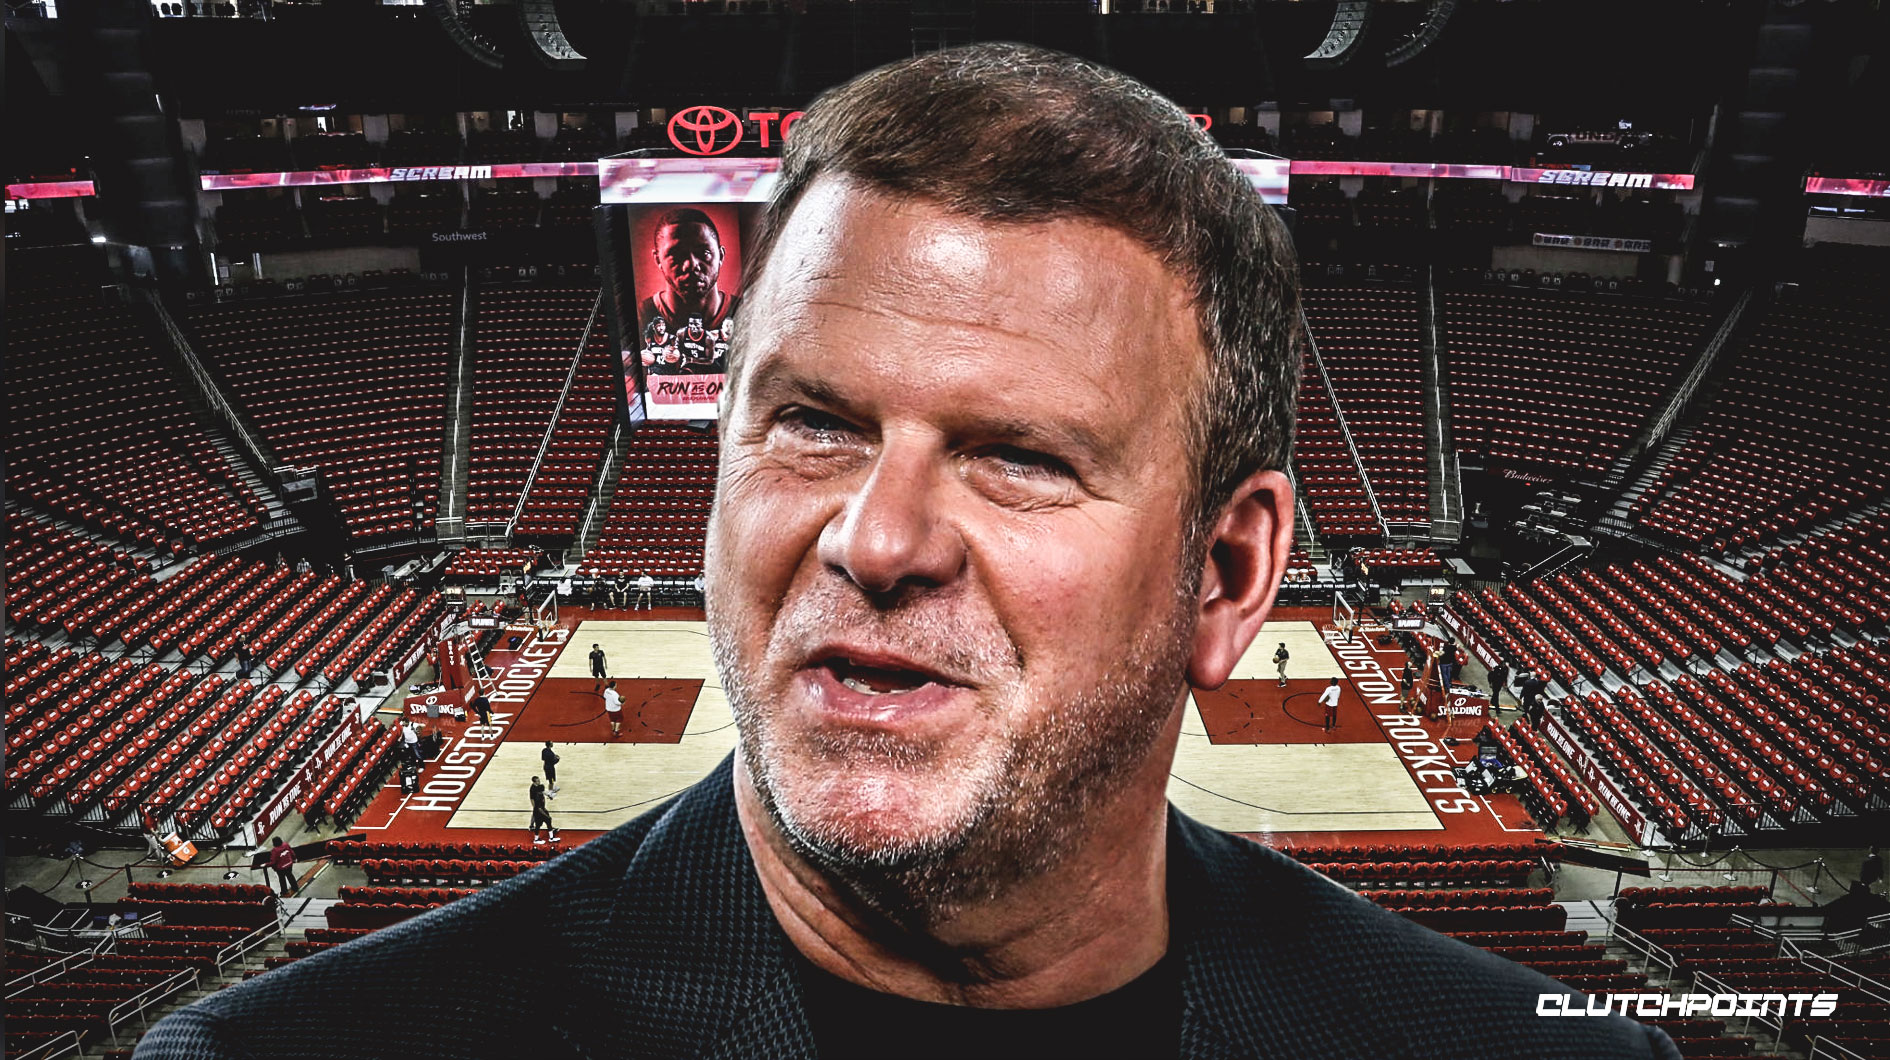 Owner-Tilman-Fertitta-lashes-out-at-report-suggesting-he_s-cutting-costs-across-organization